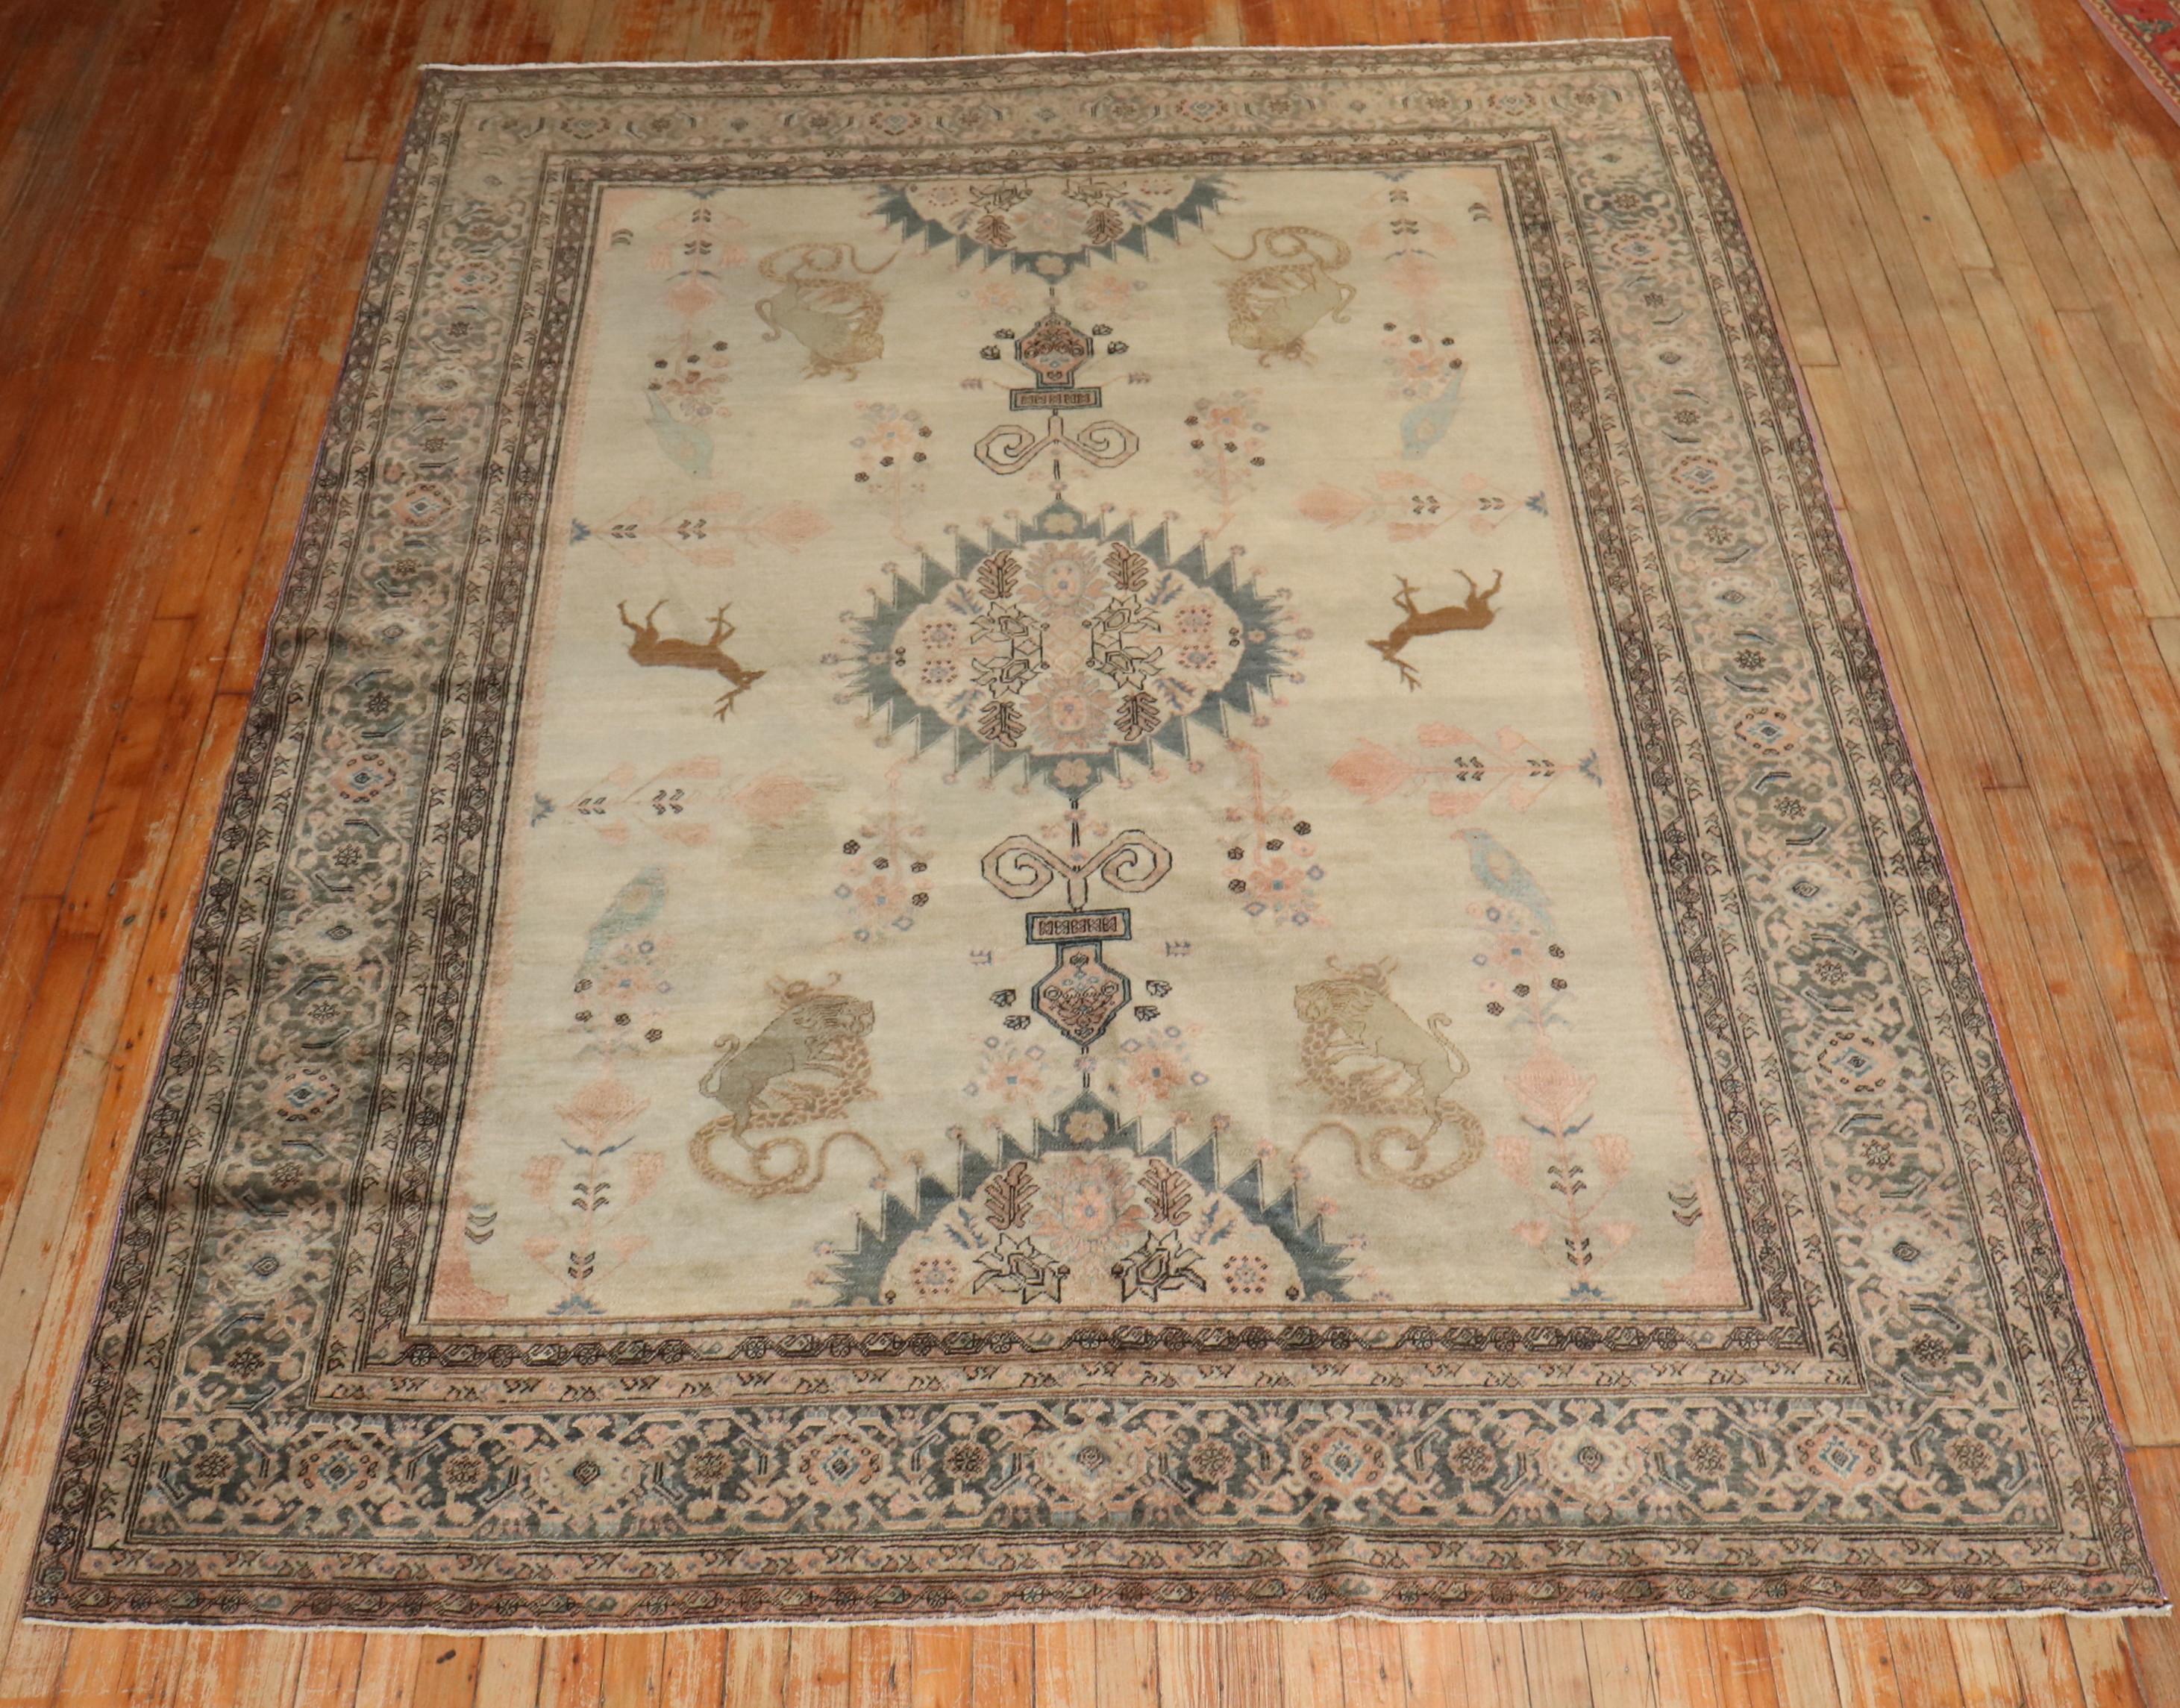 Zabihi Collection Antique Persian Sarouk Ferehan Pictorial Animal Rug For Sale 7